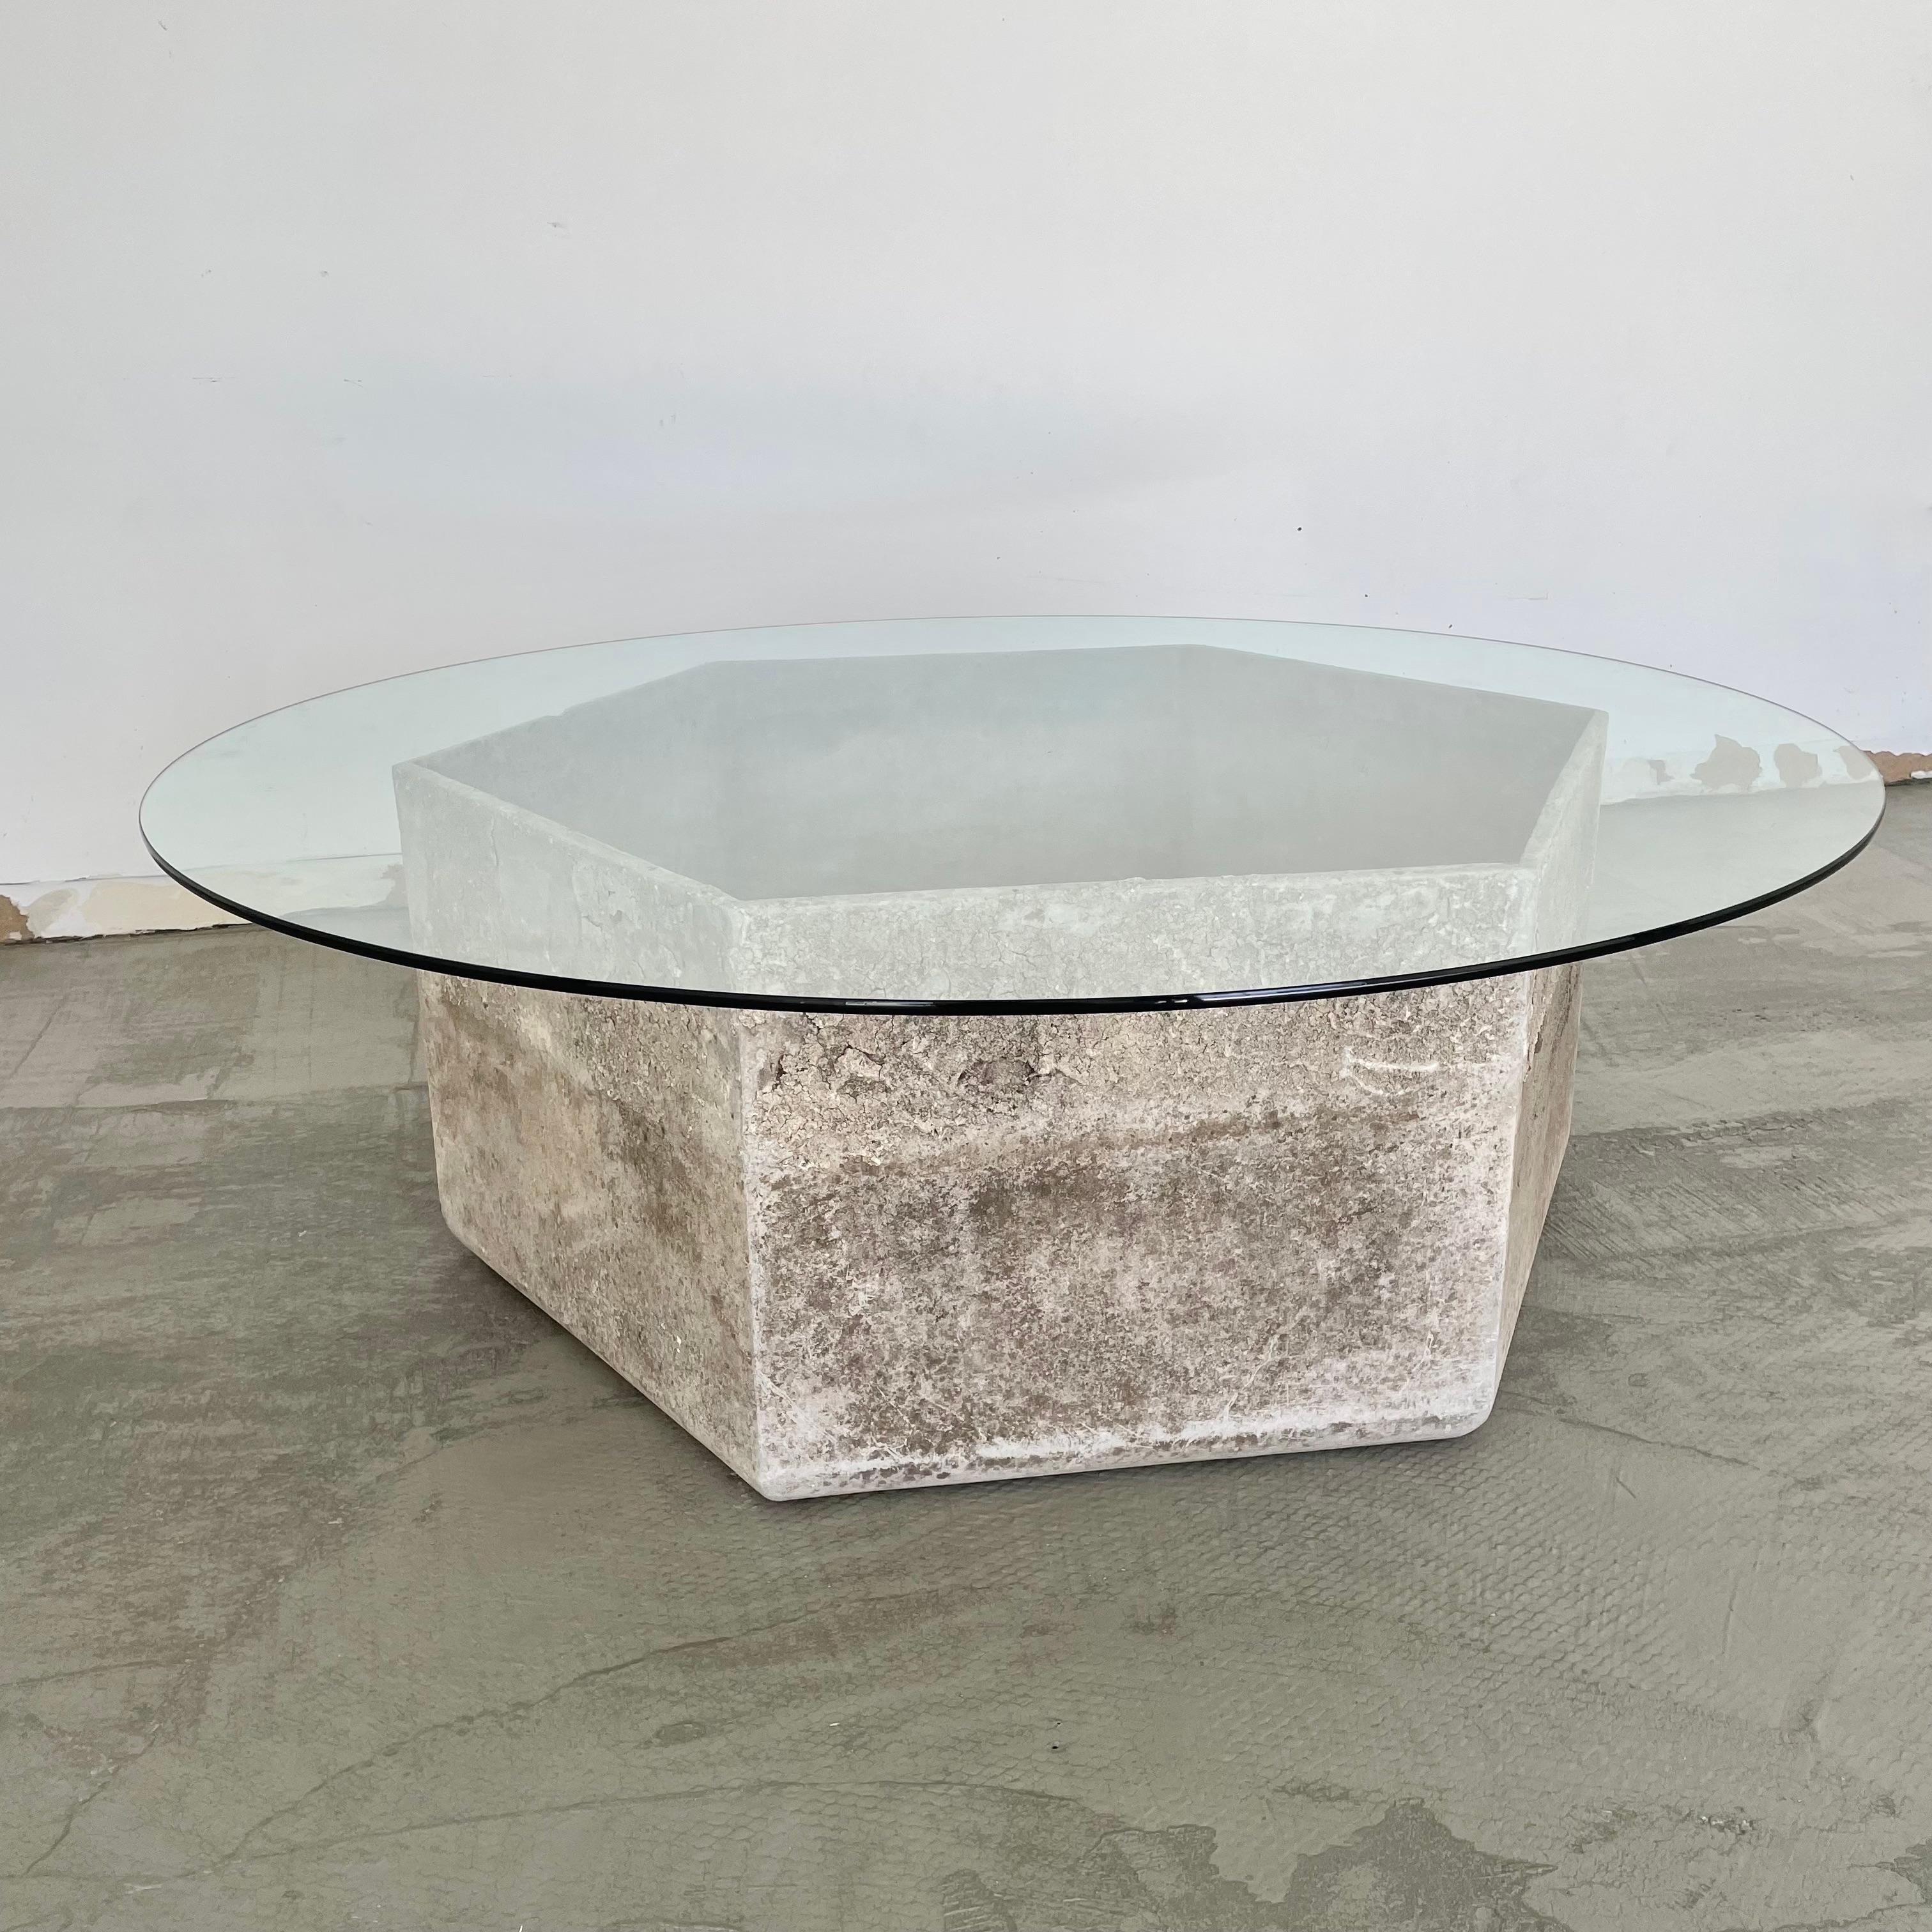 Fantastic hexagon table by Swiss architect Willy Guhl for Eternit. Great scale and unique shape. Suitable for indoor and outdoors. Only one available. New pencil edge glass top. Stunning sculptural table. 

 The base dimensions are 36.75